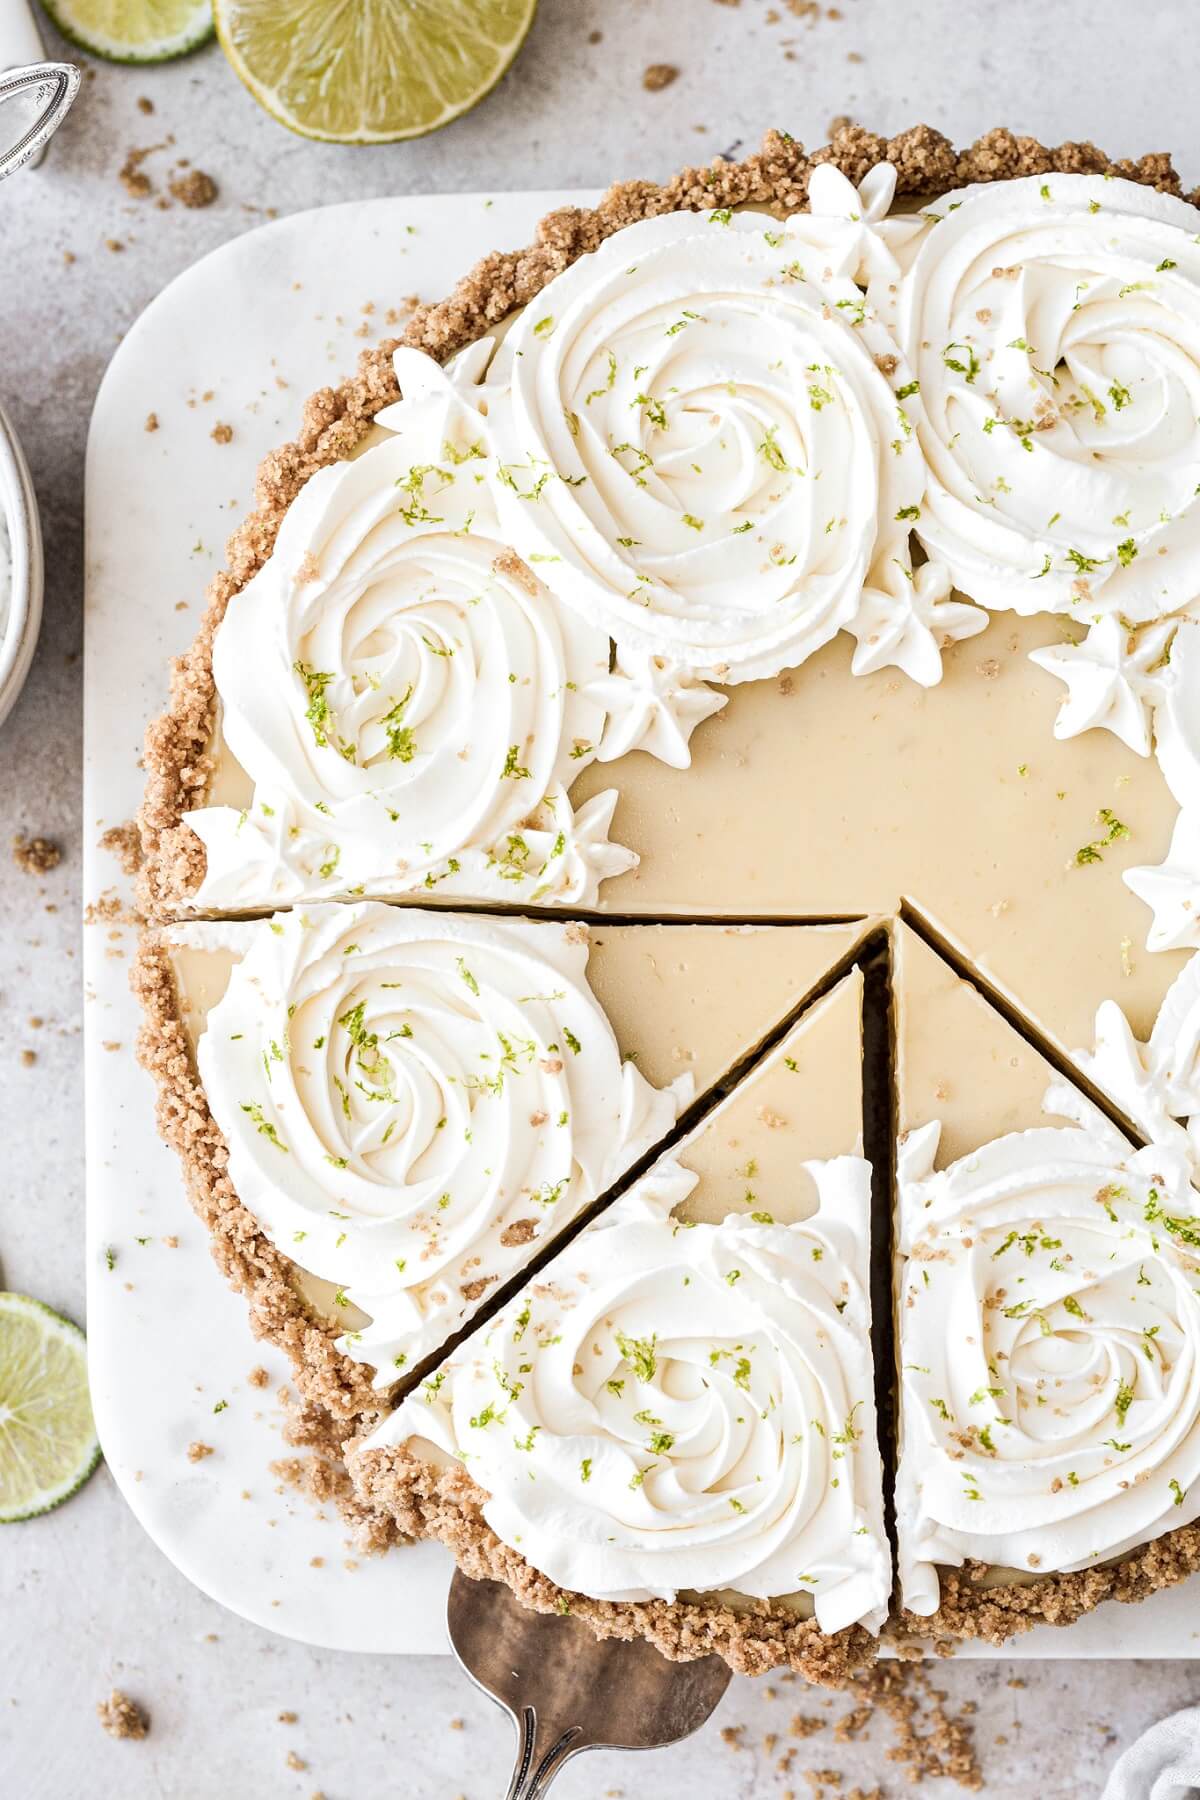 A key lime pie cut into slices.